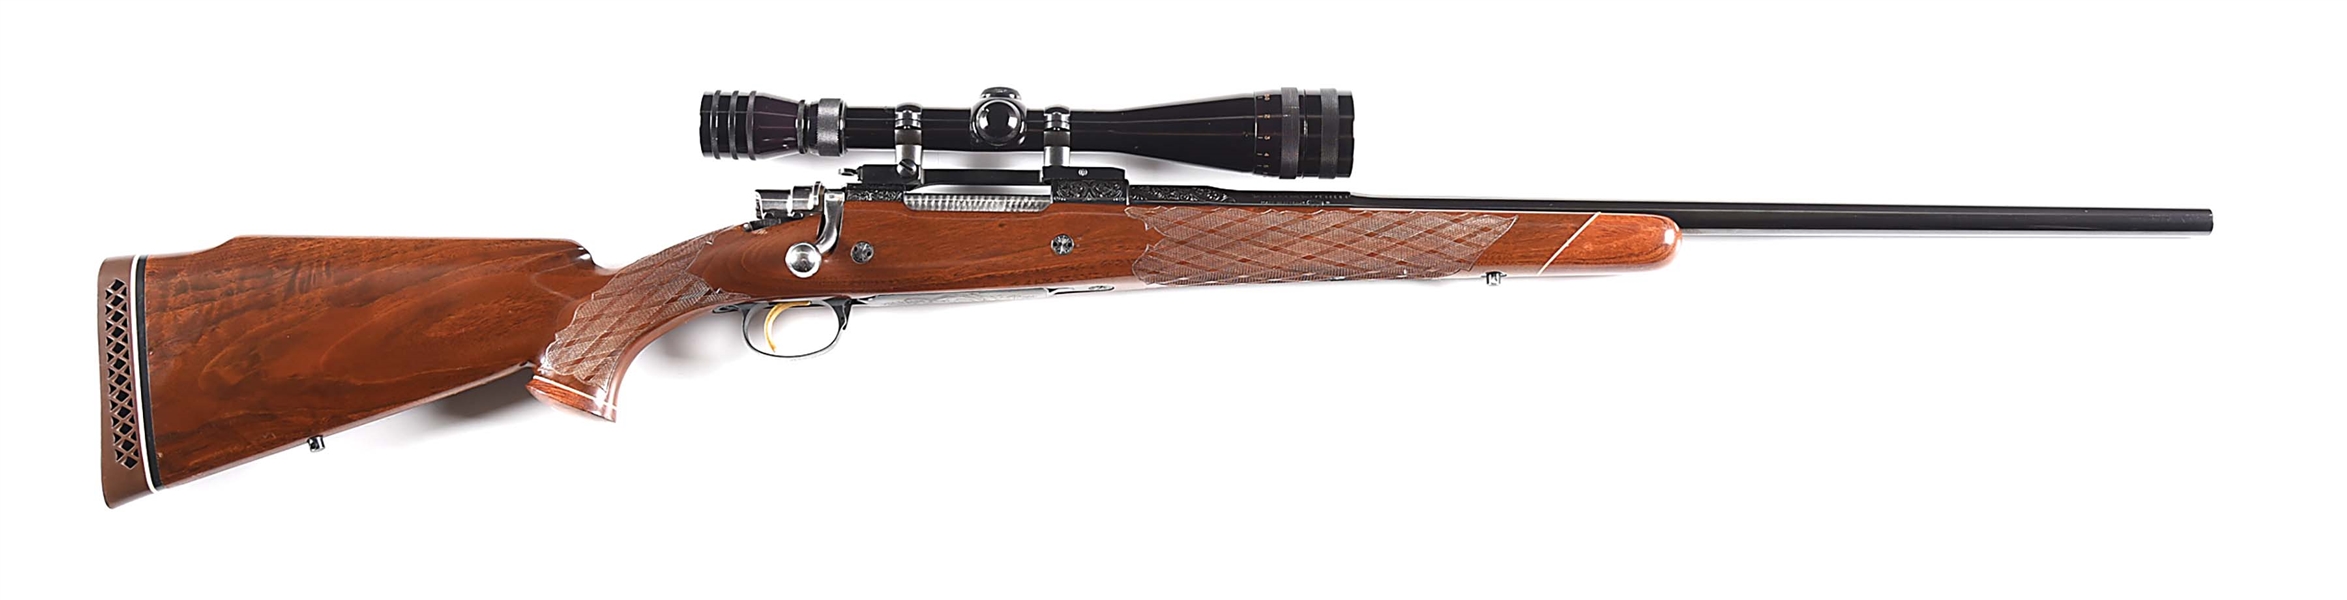 (M) BROWNING MEDALLION GRADE HIGH-POWER BOLT ACTION RIFLE.